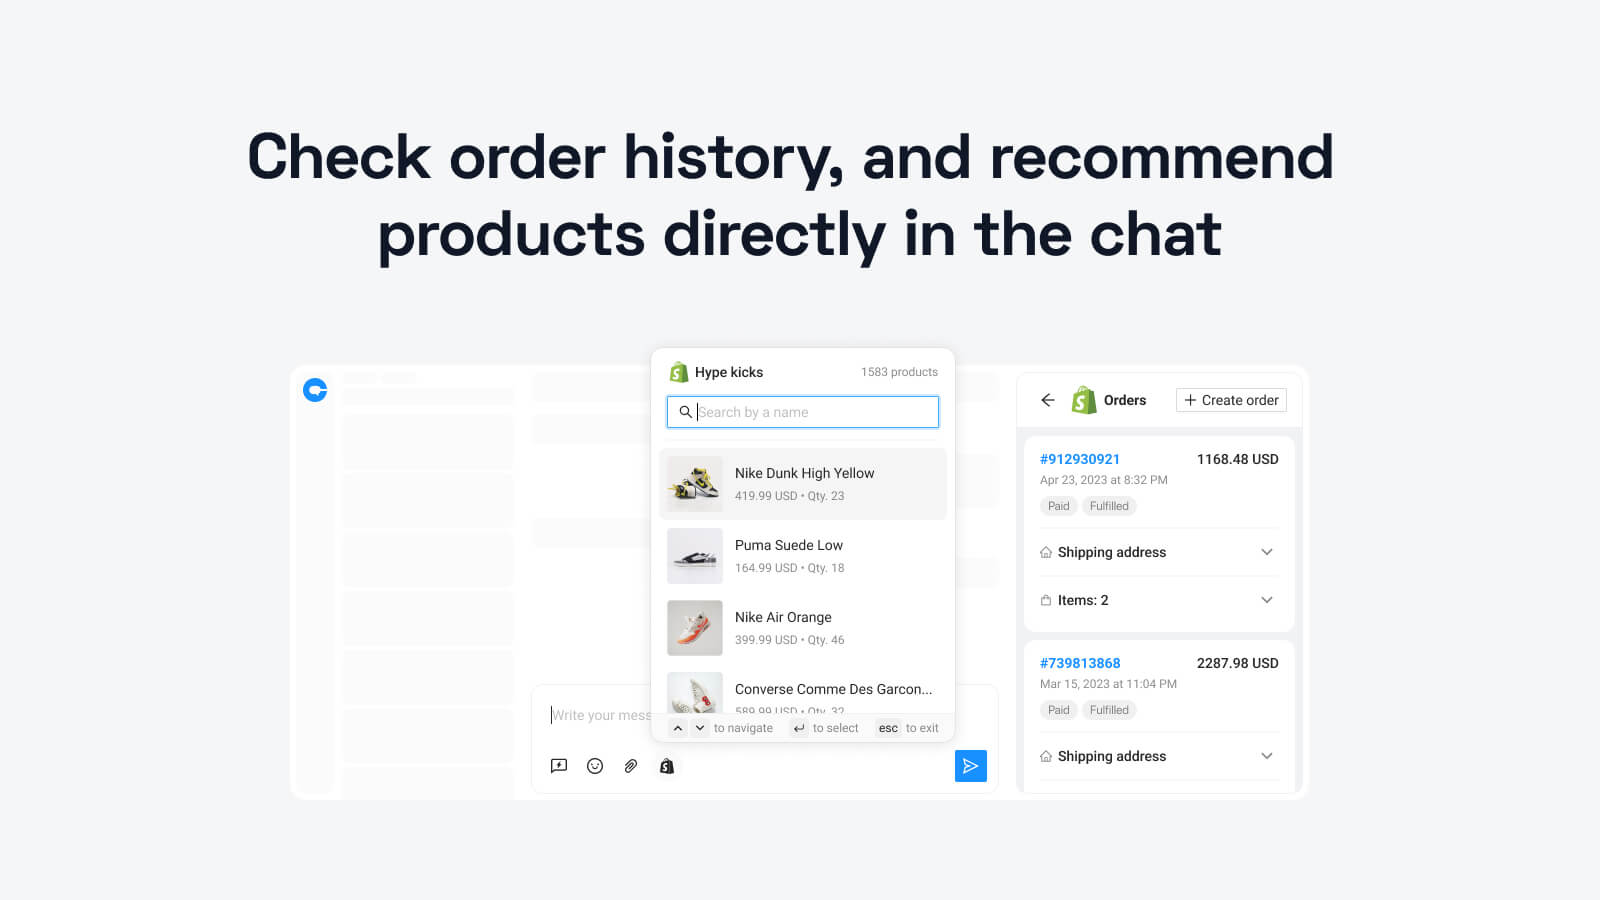 Check order history, and recommend products directly in the chat